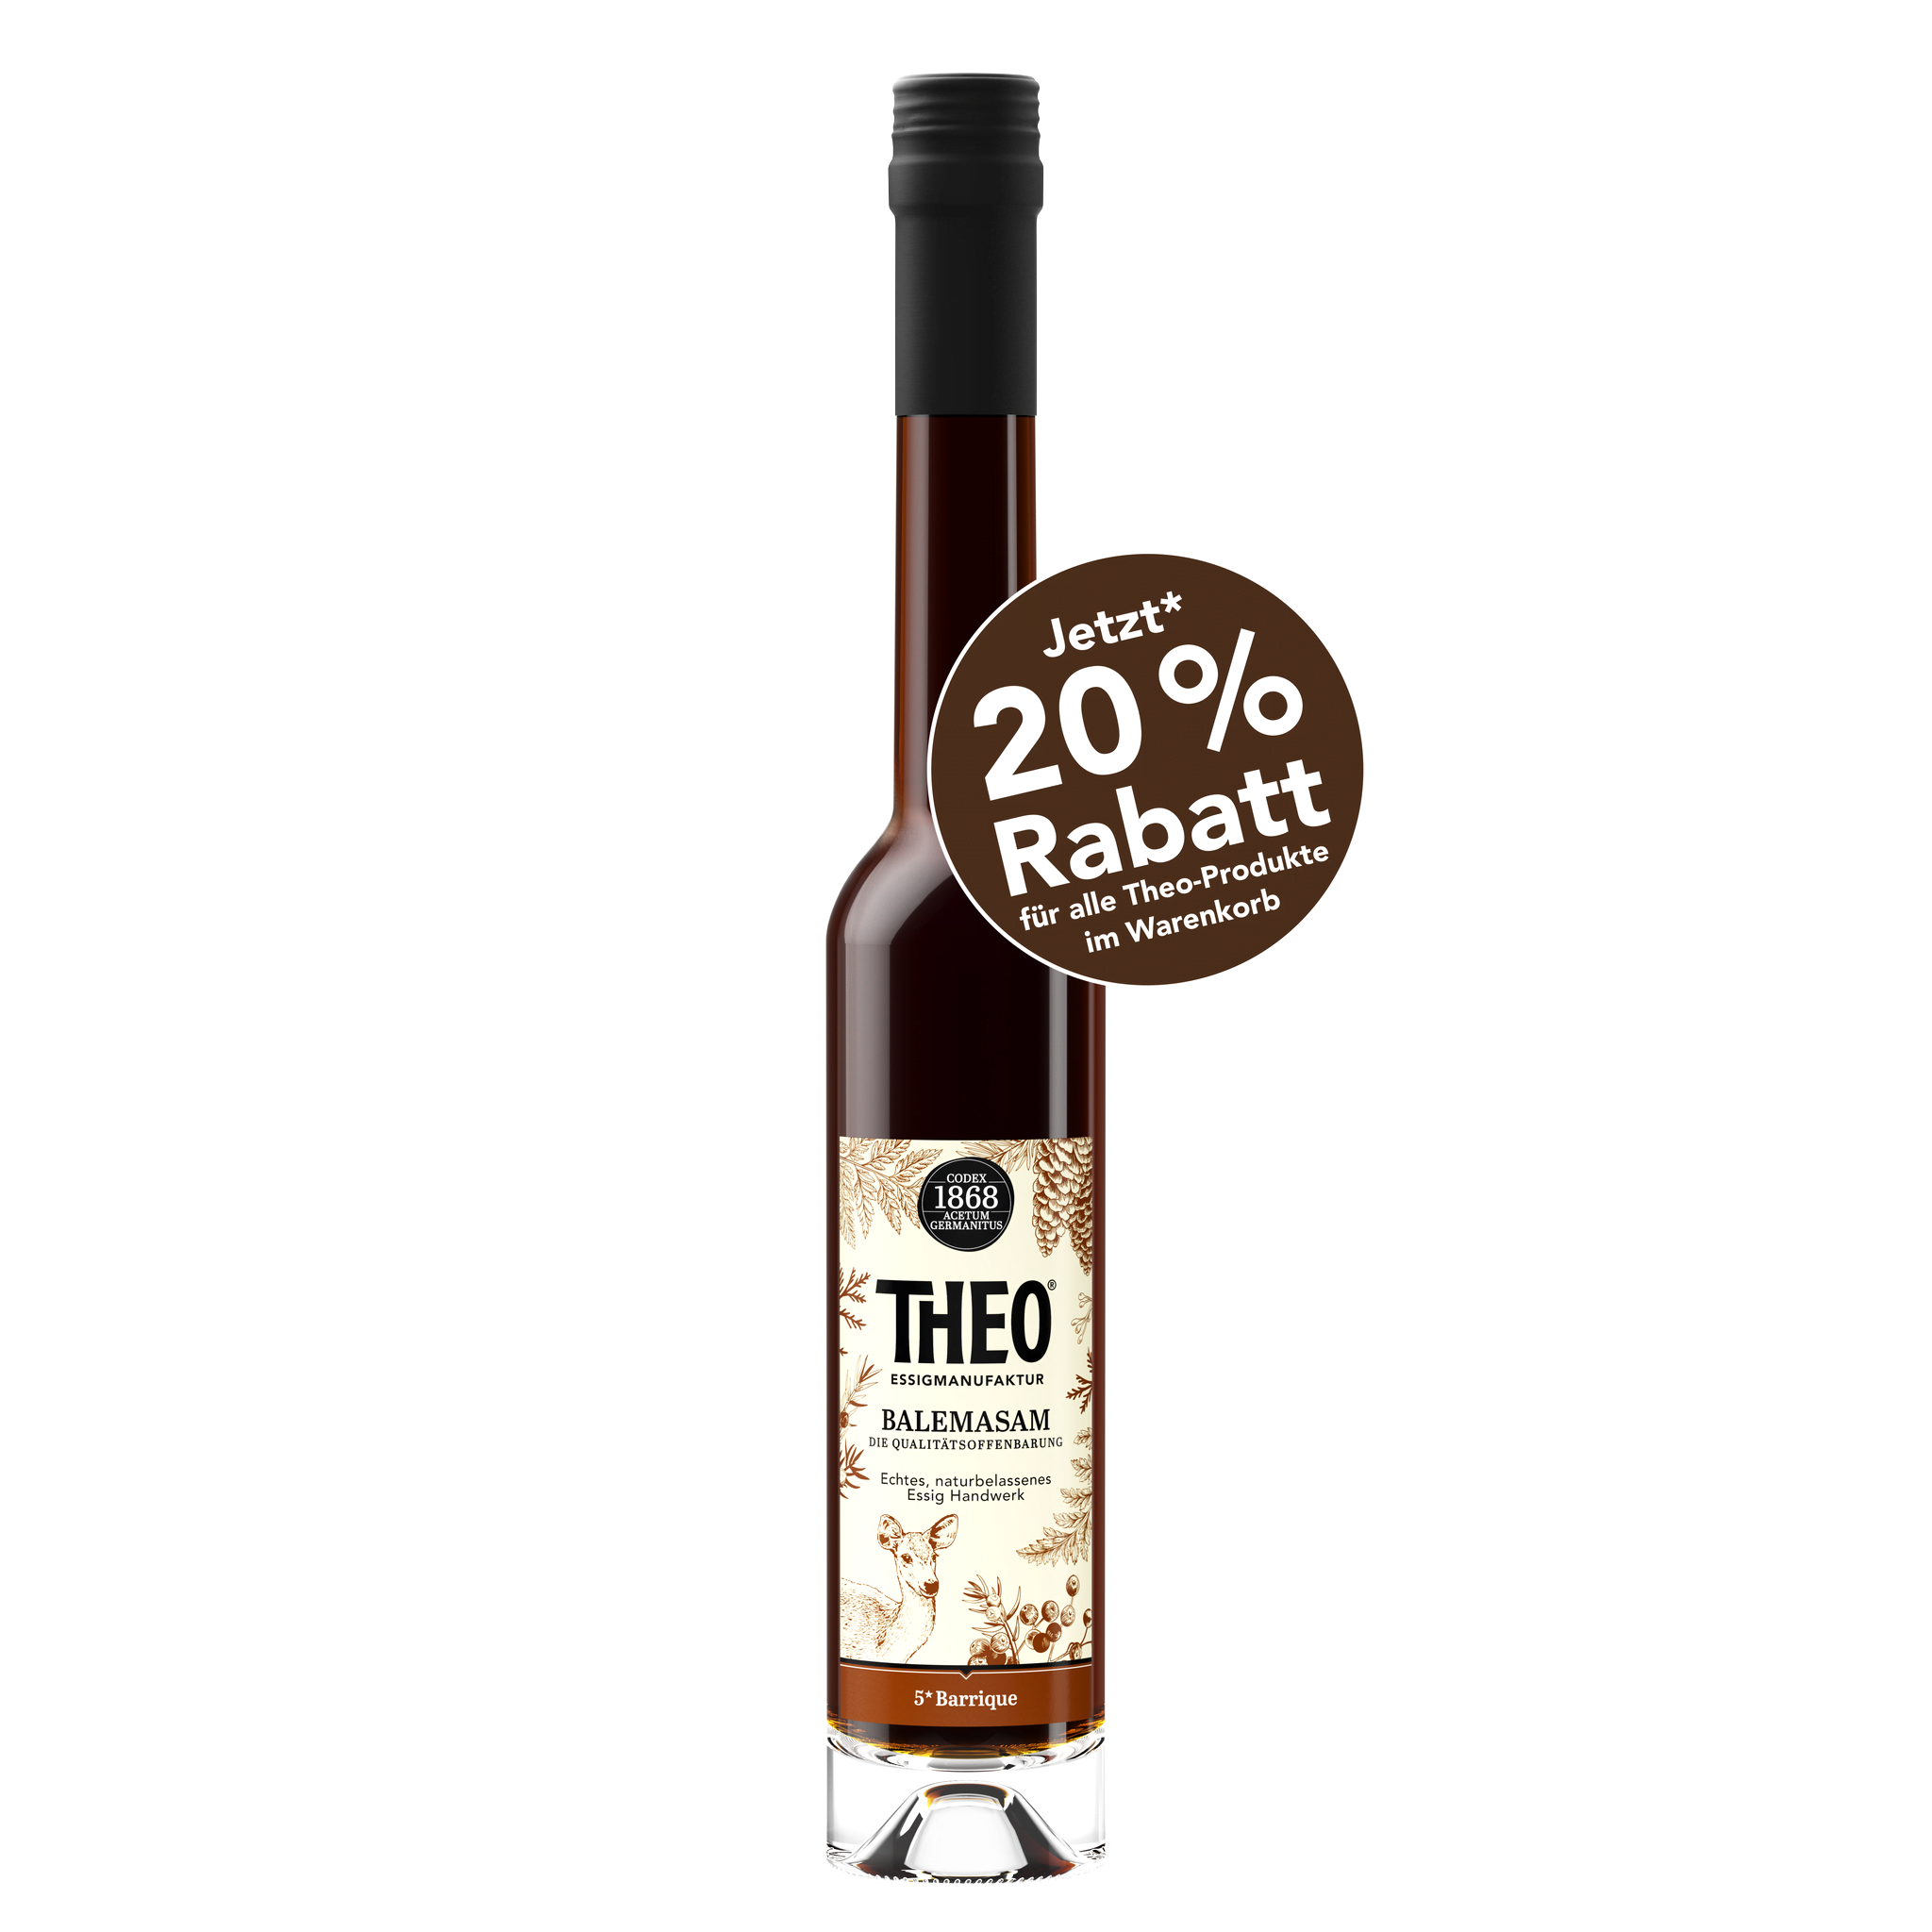 Theo Balemasam 5* Barrique 200 ml